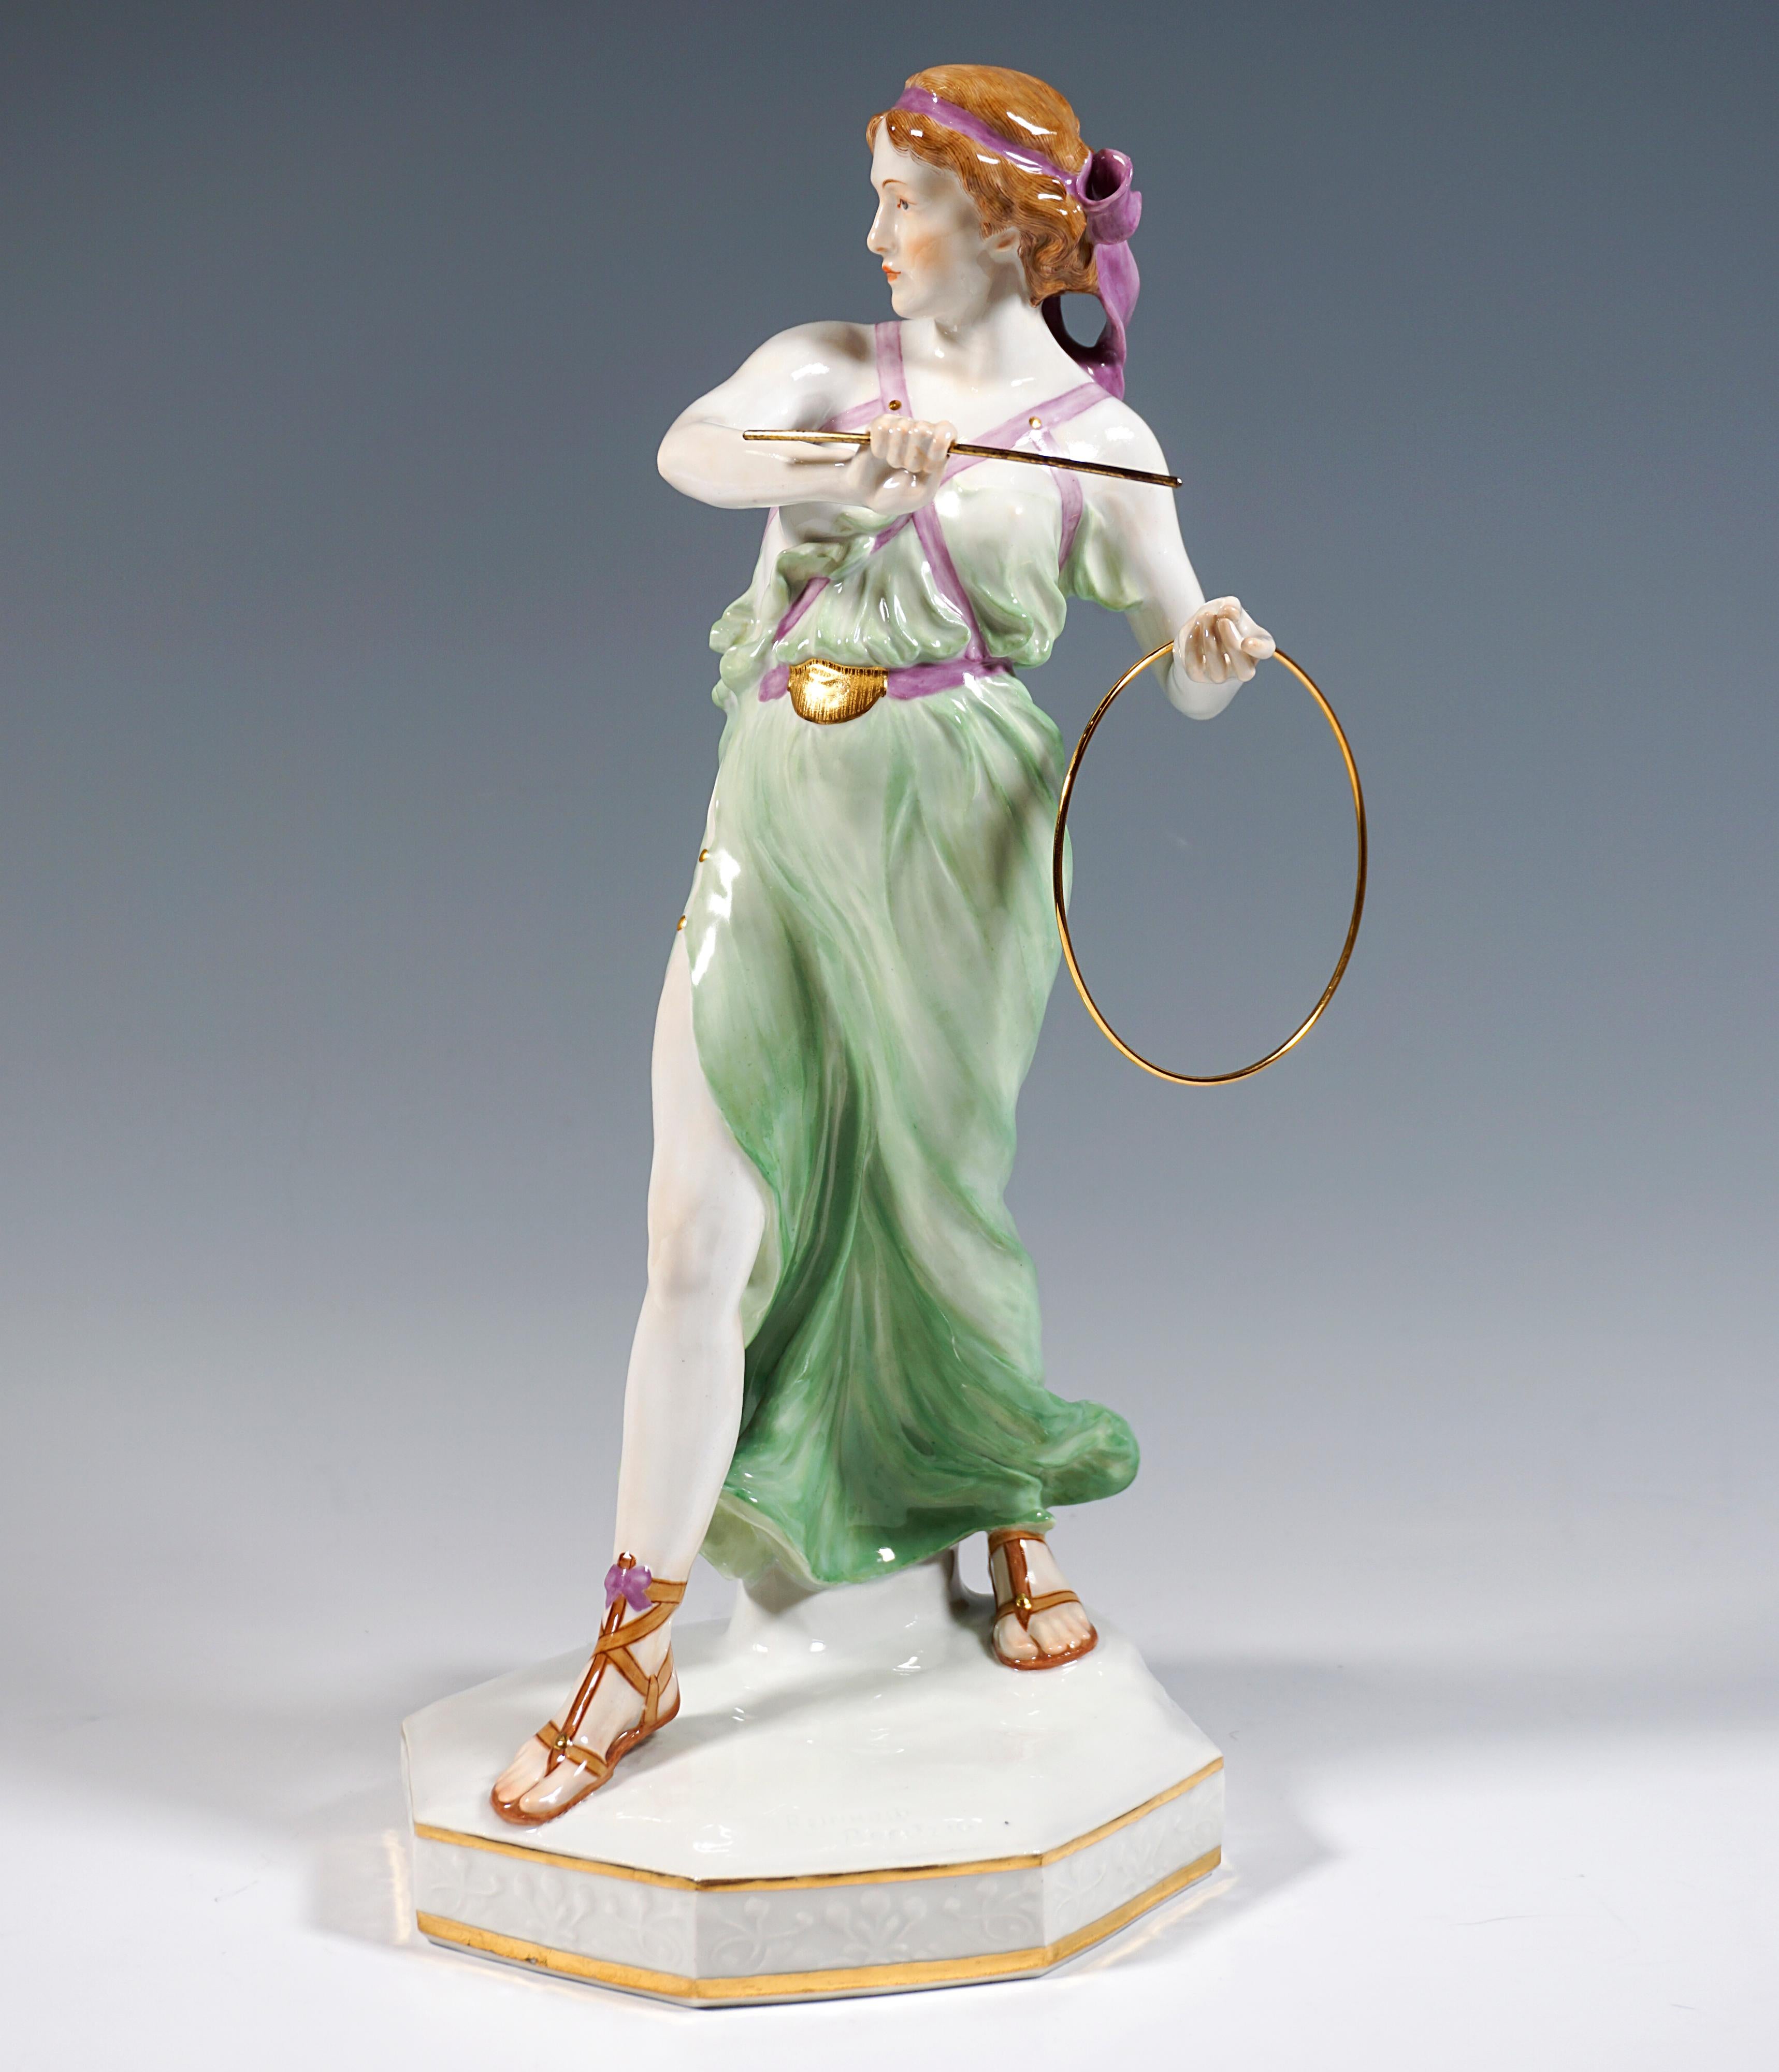 Hand-Crafted Meissen Art Nouveau Figurine Young Lady Ring Thrower, by R. Boeltzig, 1910